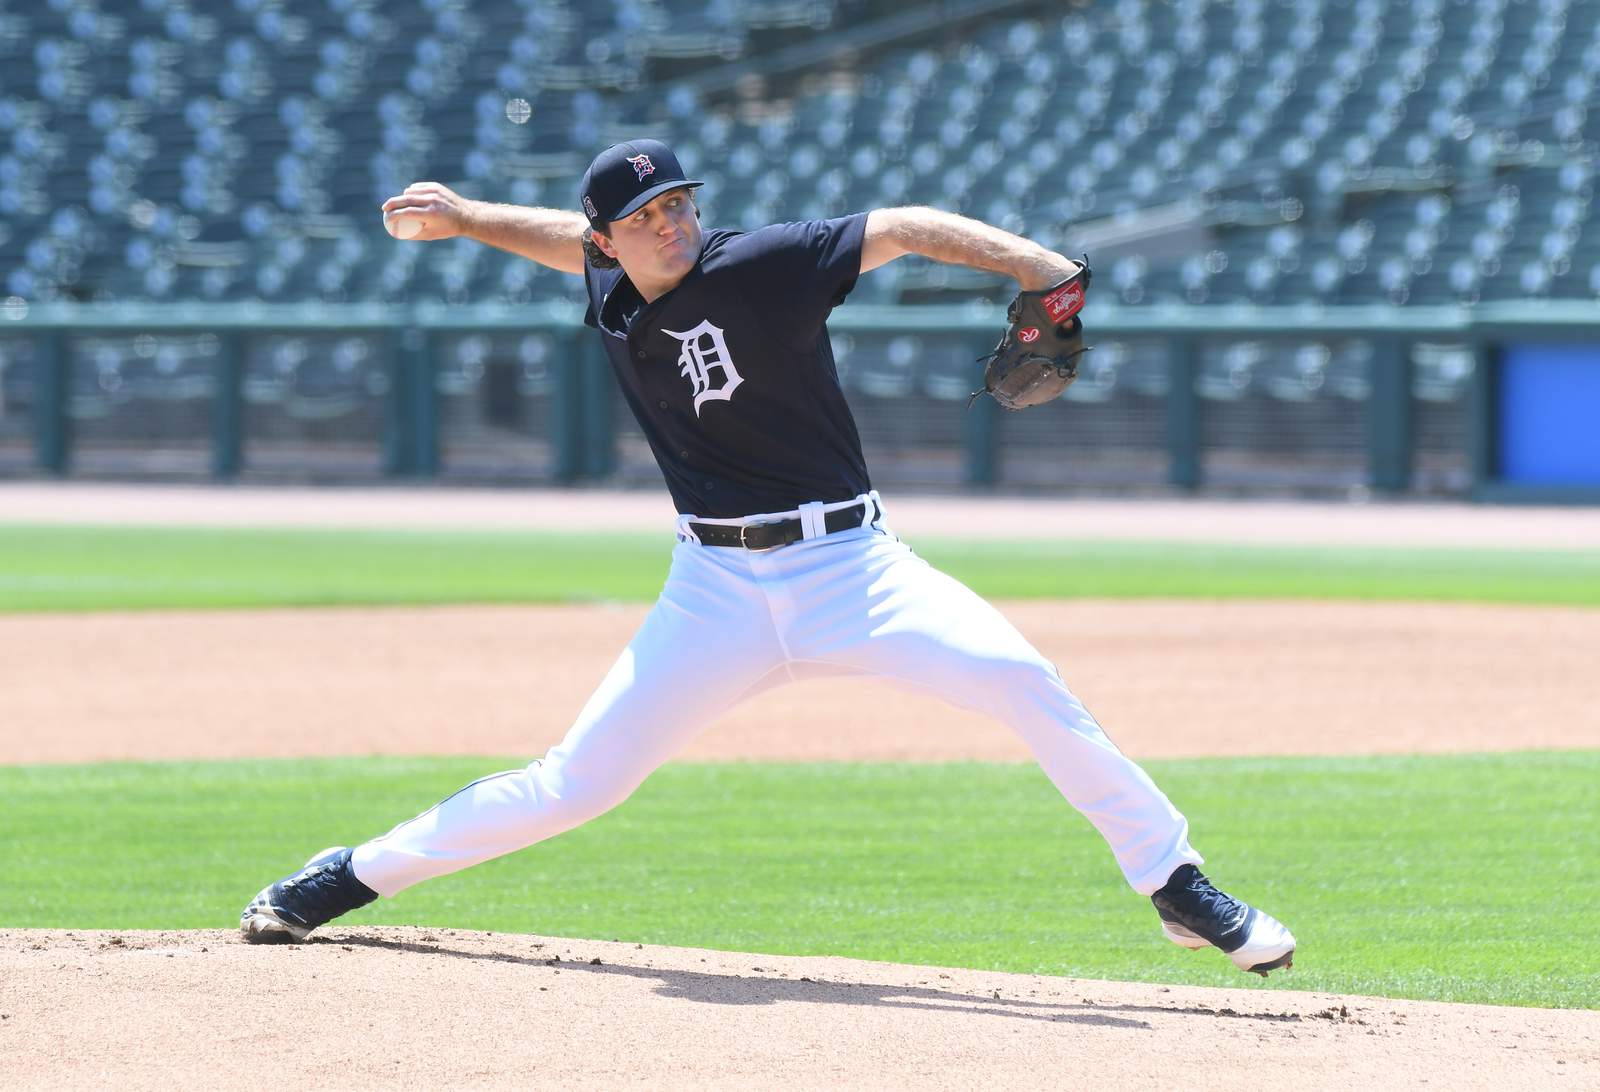 New prospect rankings suggest Detroit Tigers have best farm system in baseball